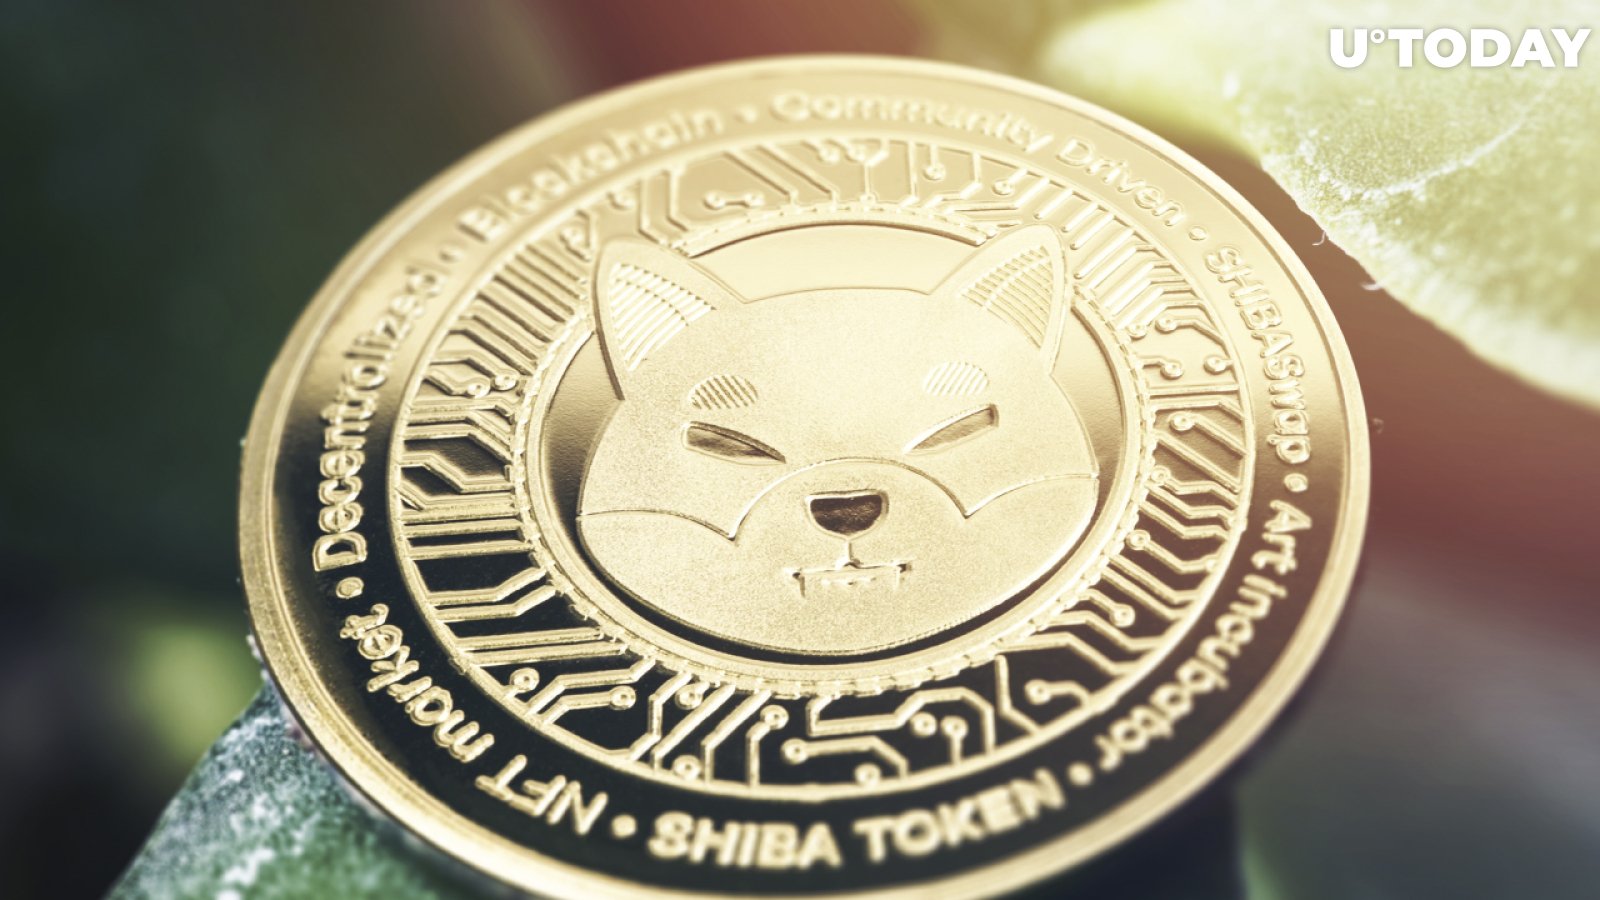 Here's When Shiba Inu Will Be Added to AMC's Crypto Payment Lineup